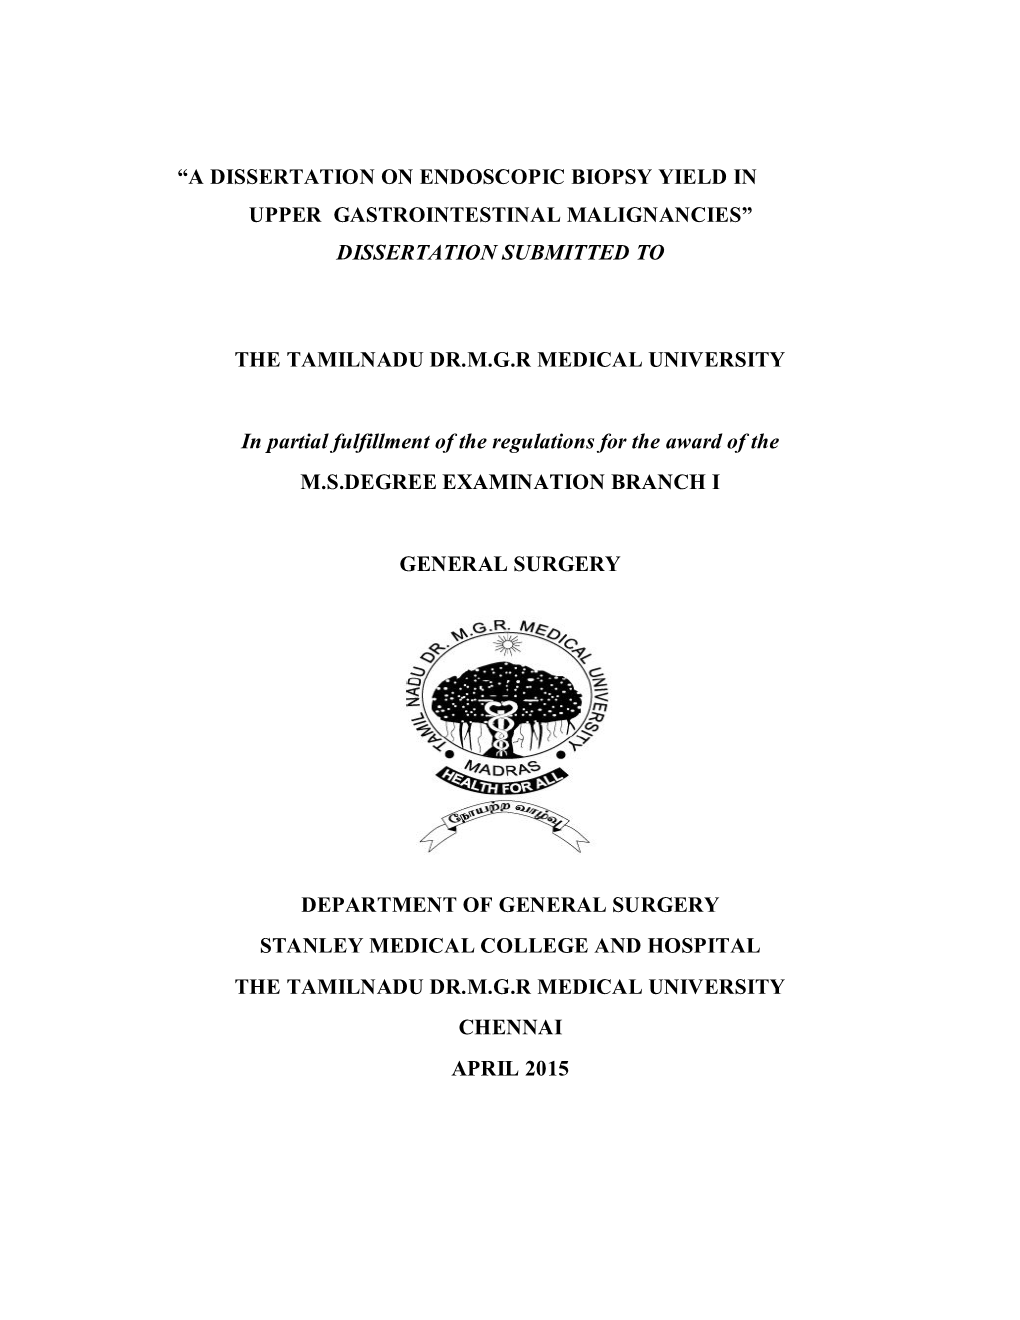 “A Dissertation on Endoscopic Biopsy Yield in Upper Gastrointestinal Malignancies” Dissertation Submitted To